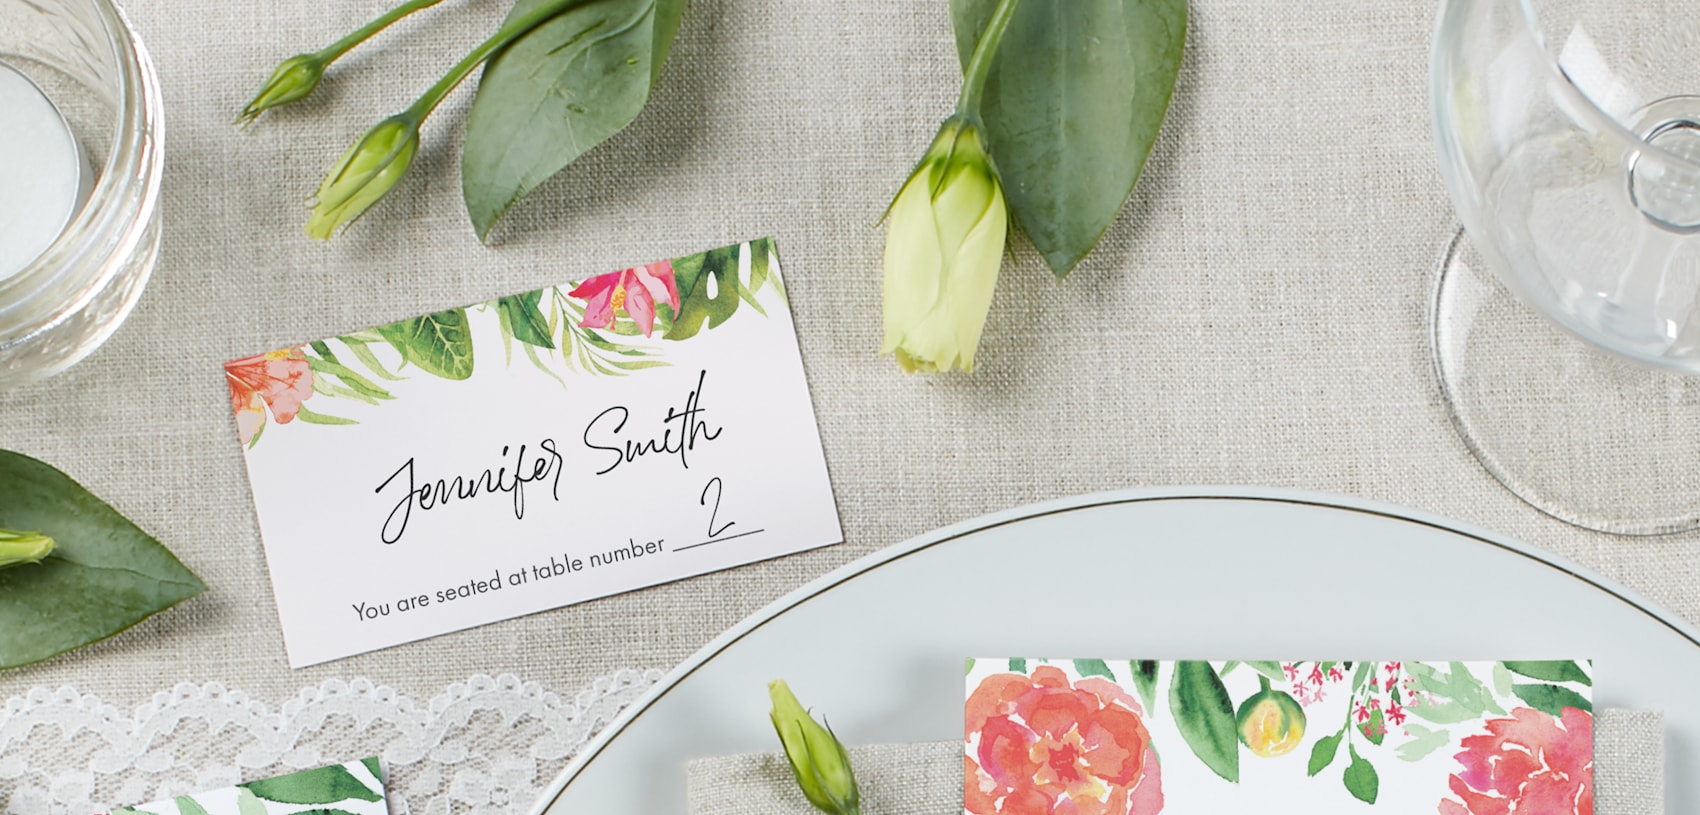 CUSTOM,PRINT,PERSONALIZE,COLORS Details about   50 sets wedding table cards 